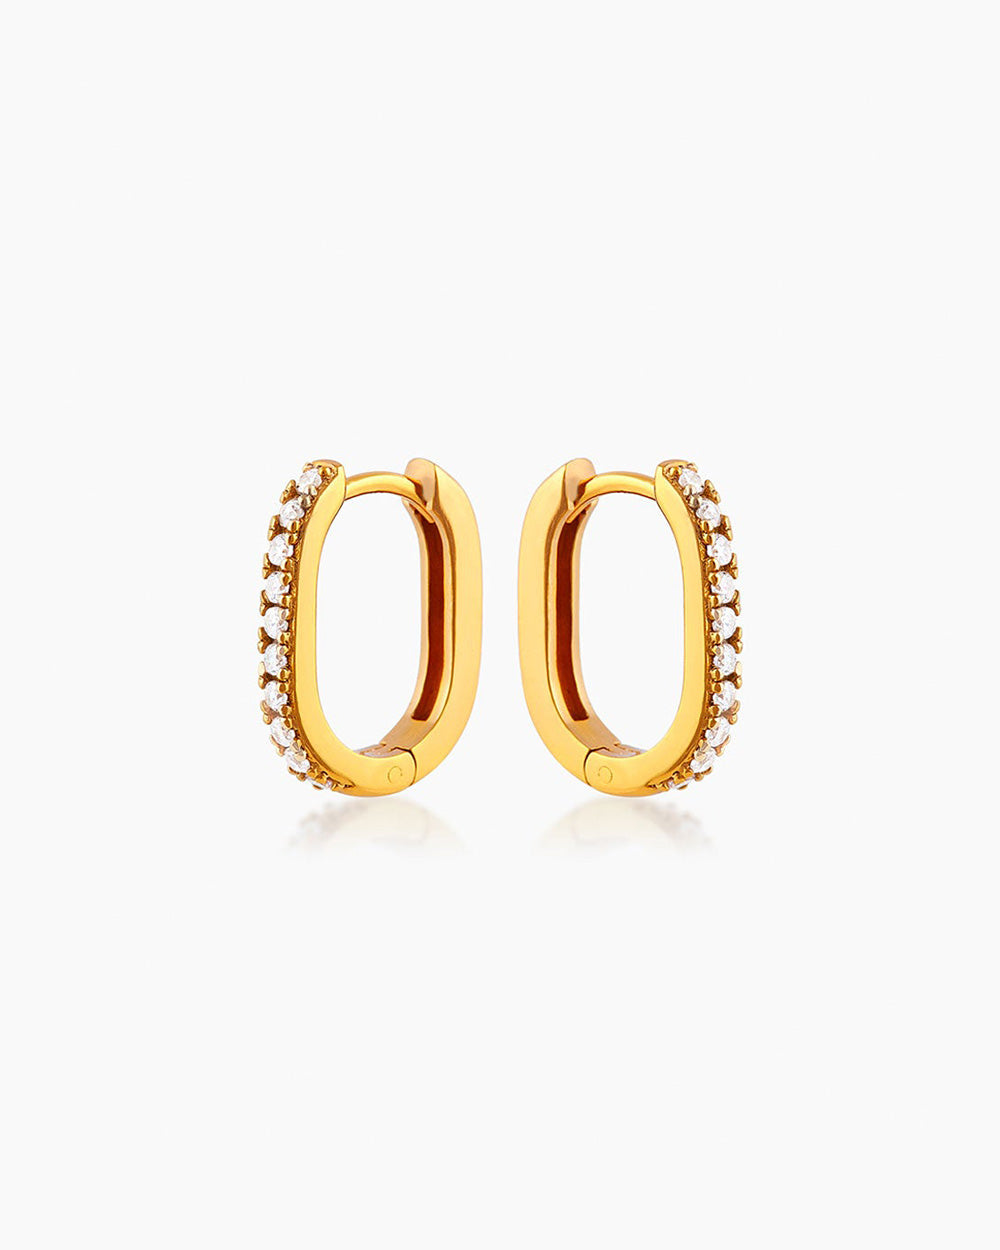 The Lucy Huggies, dainty gold earrings with a high-shine pavé-set finish and unique silhouette